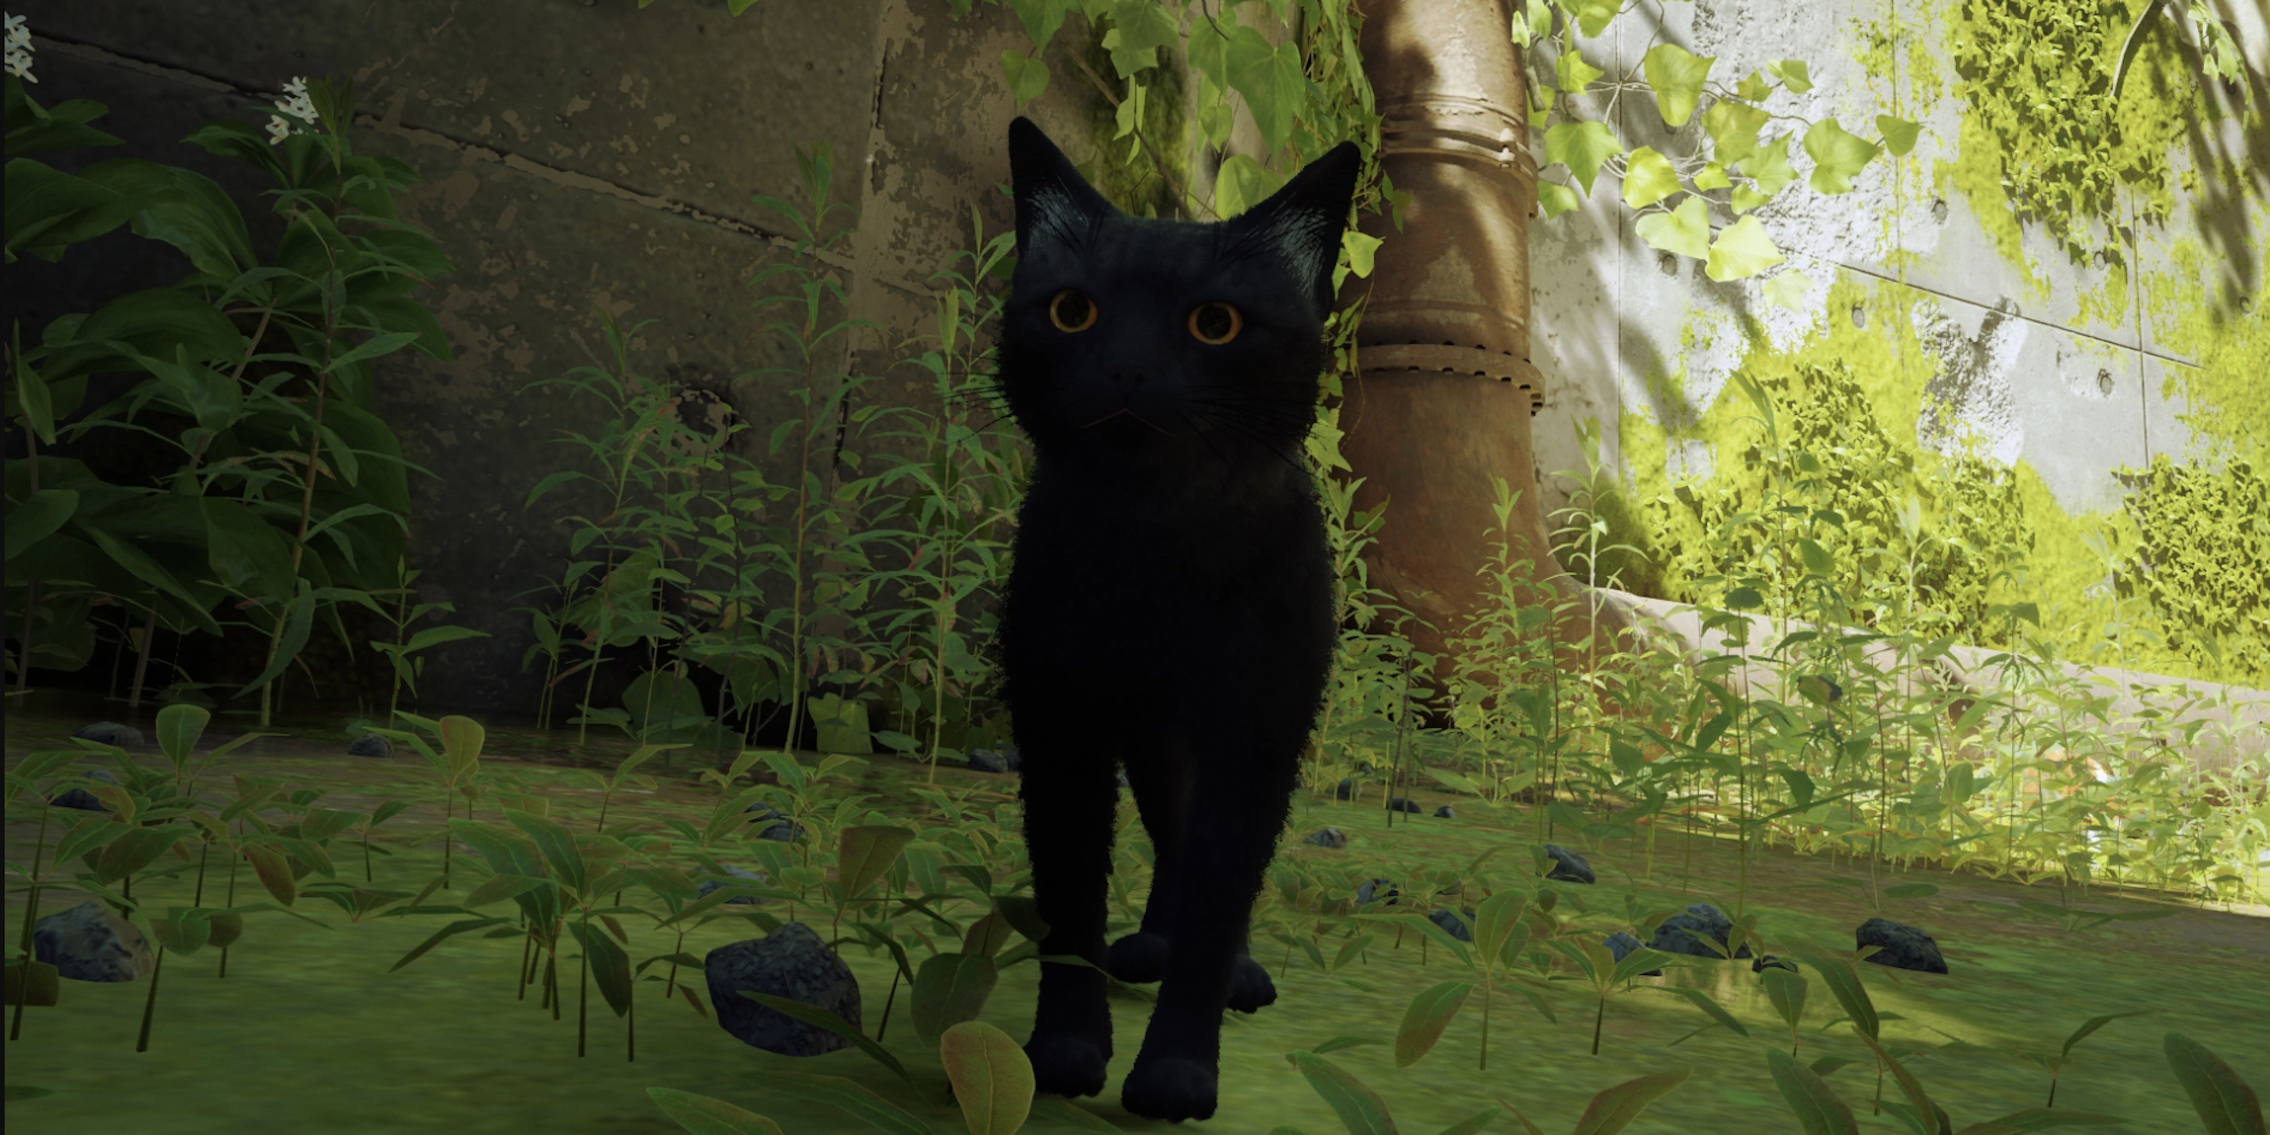 image of a black cat in a deserted space in a video game